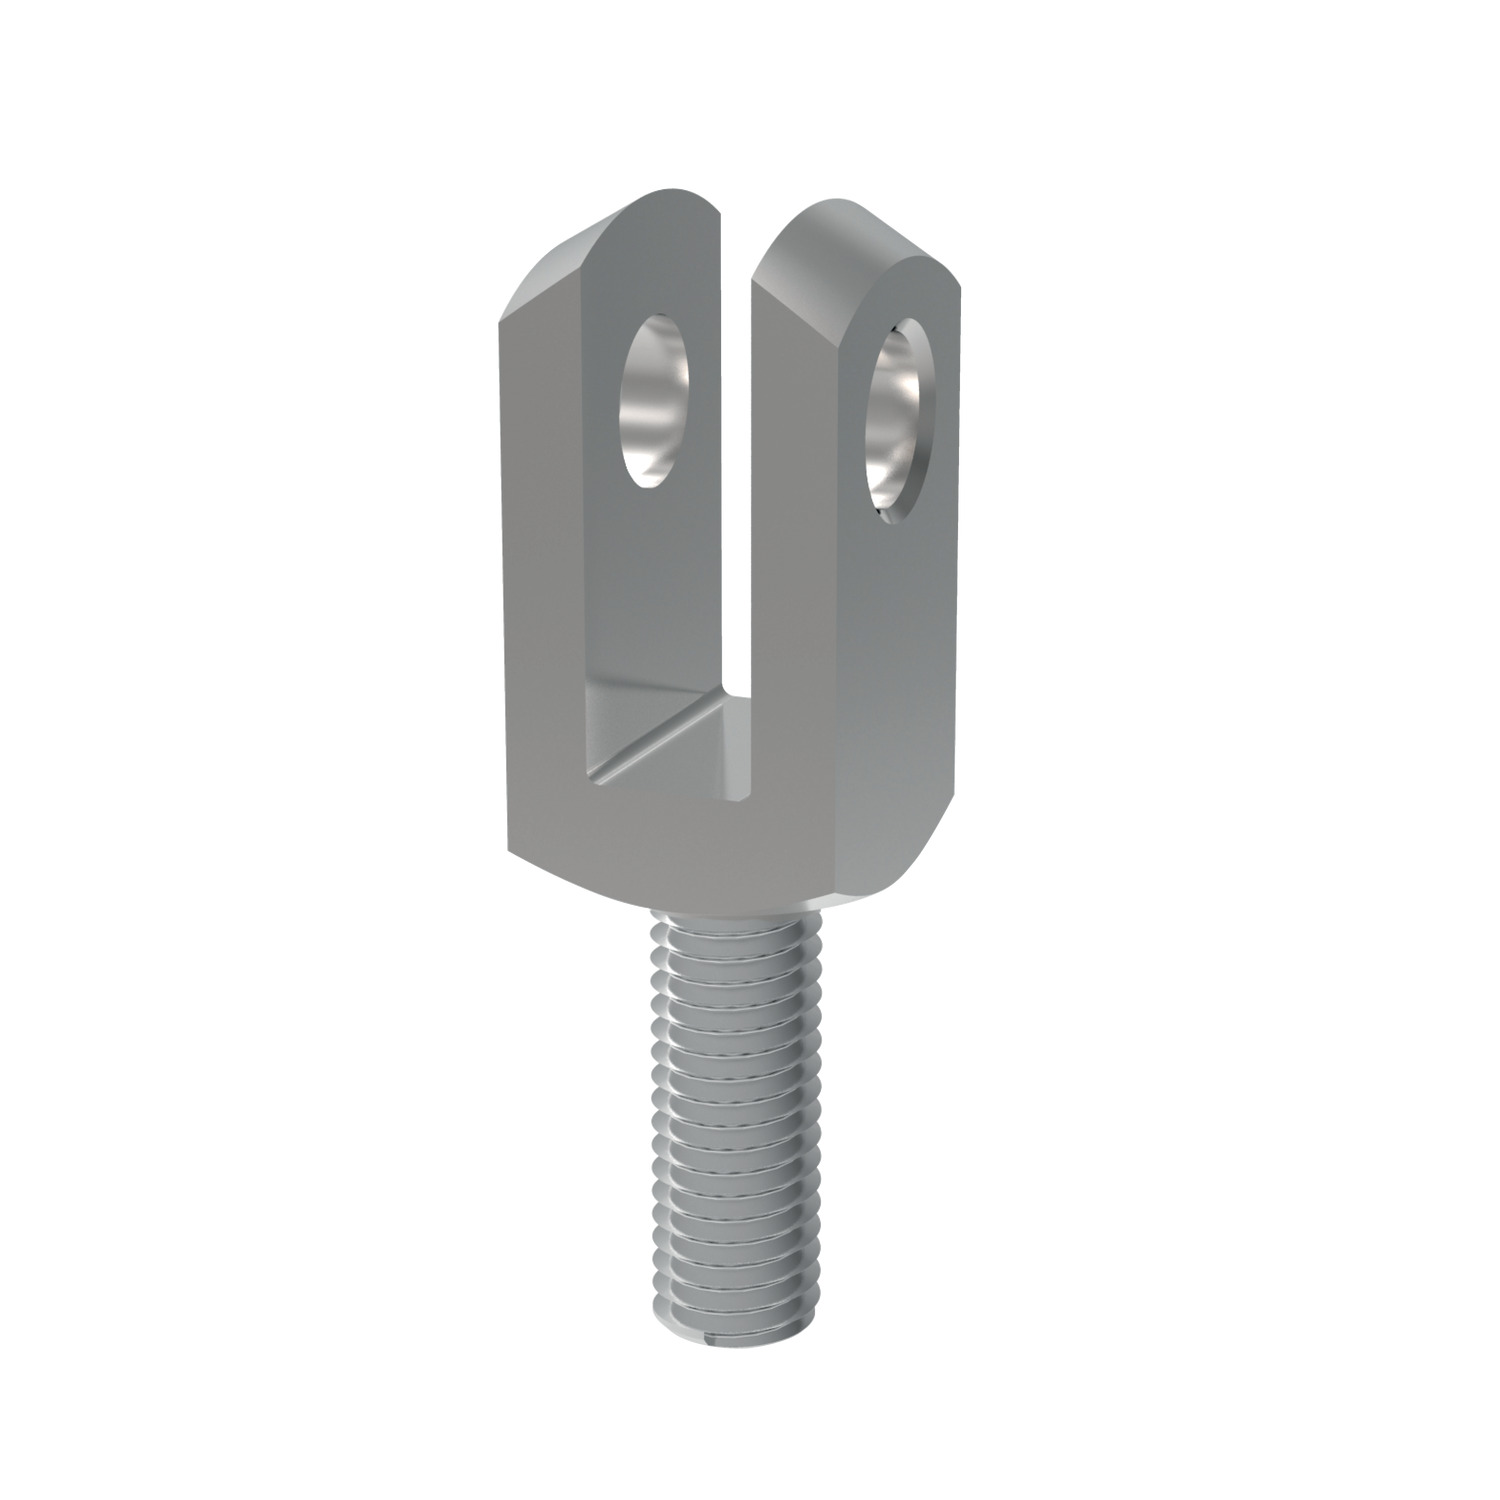 Male Clevis Joints Male clevis joints in zinc plated steel. Also available in left hand thread (R3411).